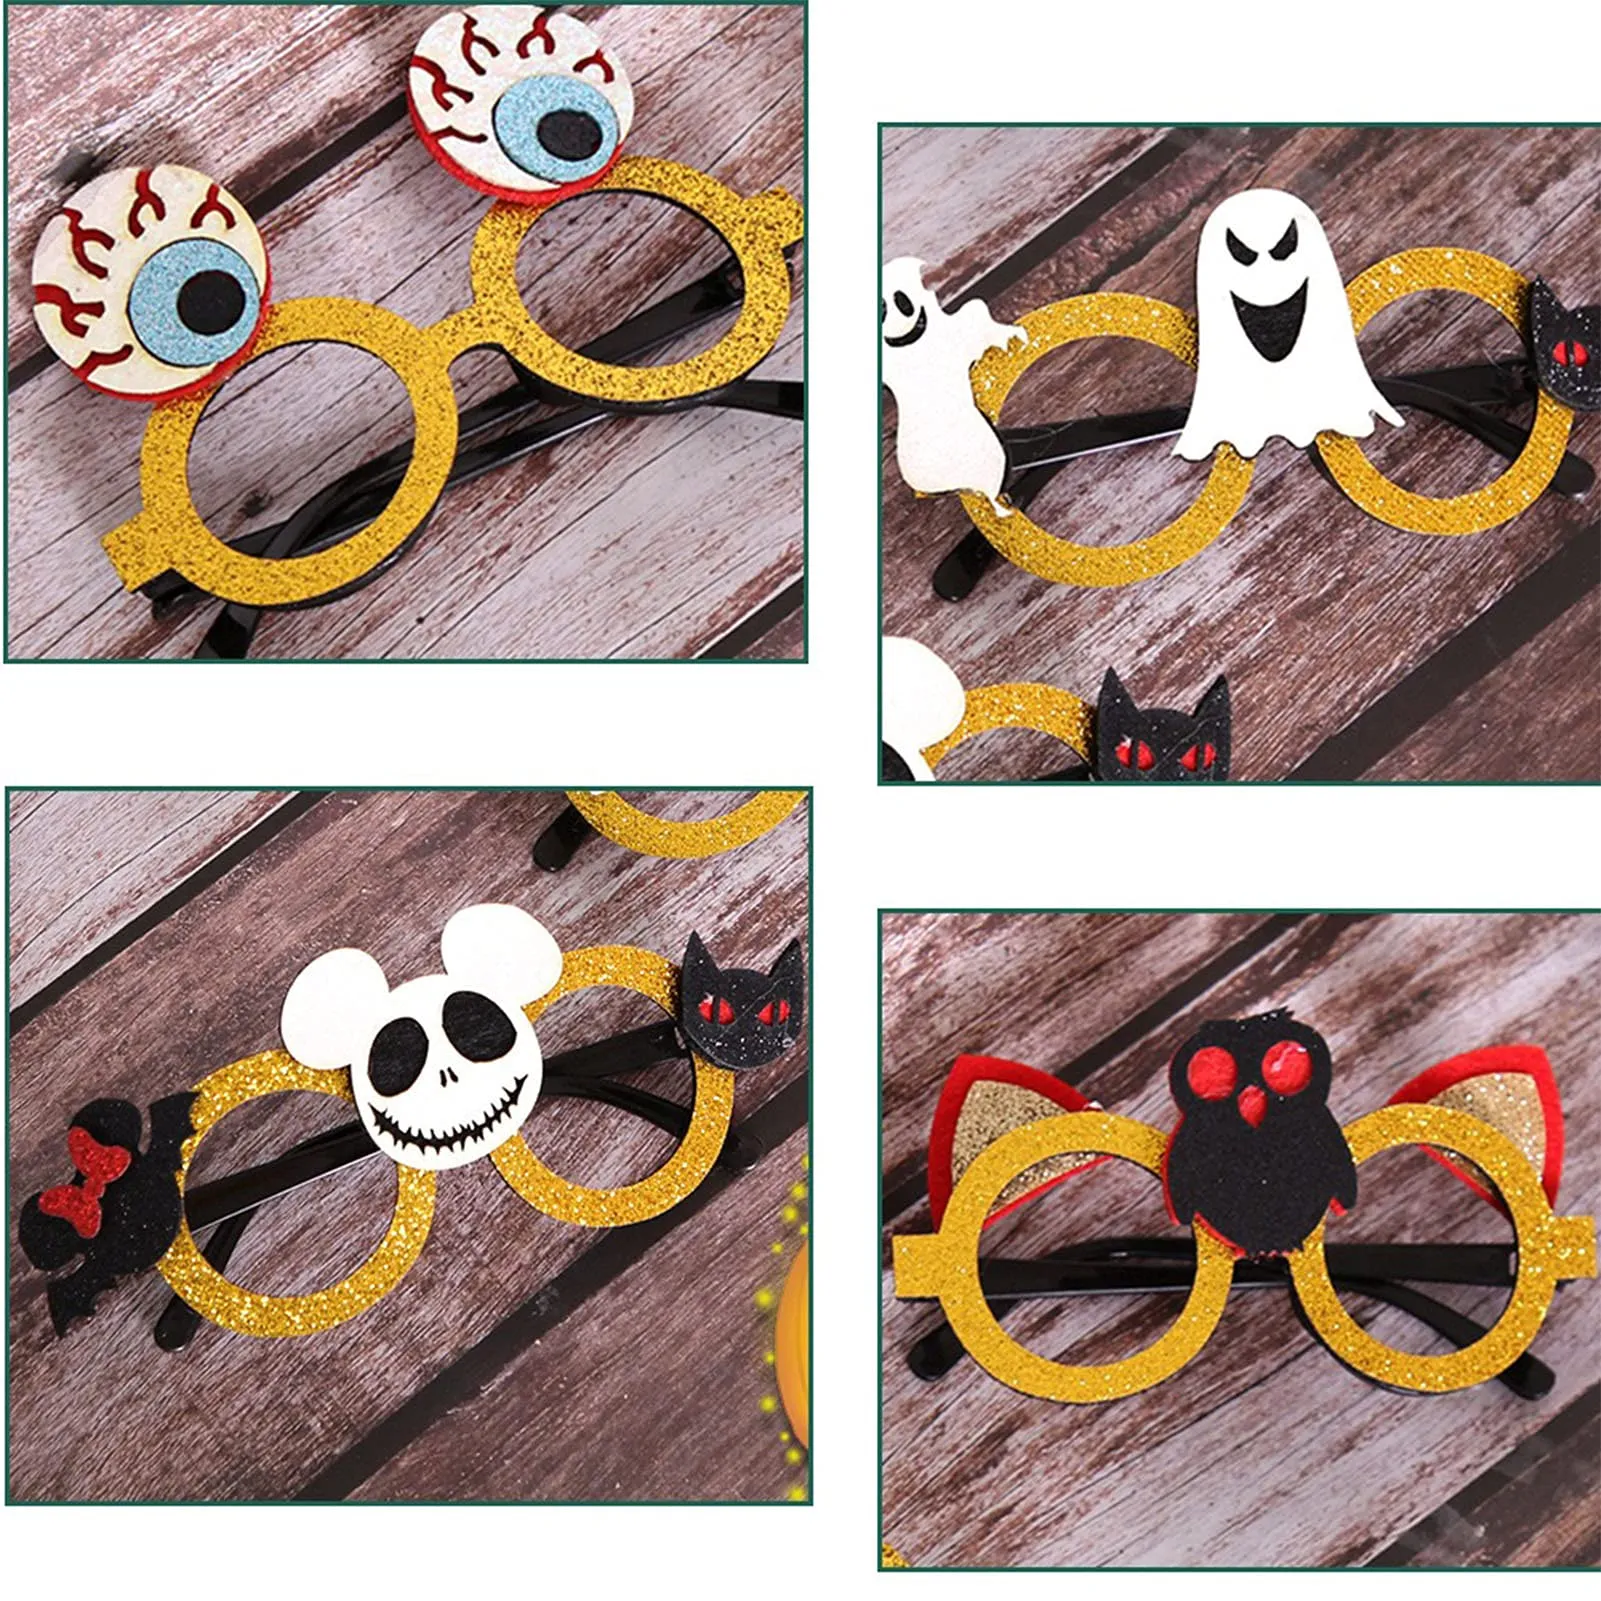 nc halloween glasses party funny glasses cosplay eyeglasses pumpkin spider cat ghost eyewear photo props supplies novelty for costume prop decorations black white yellow 16 x 8cm